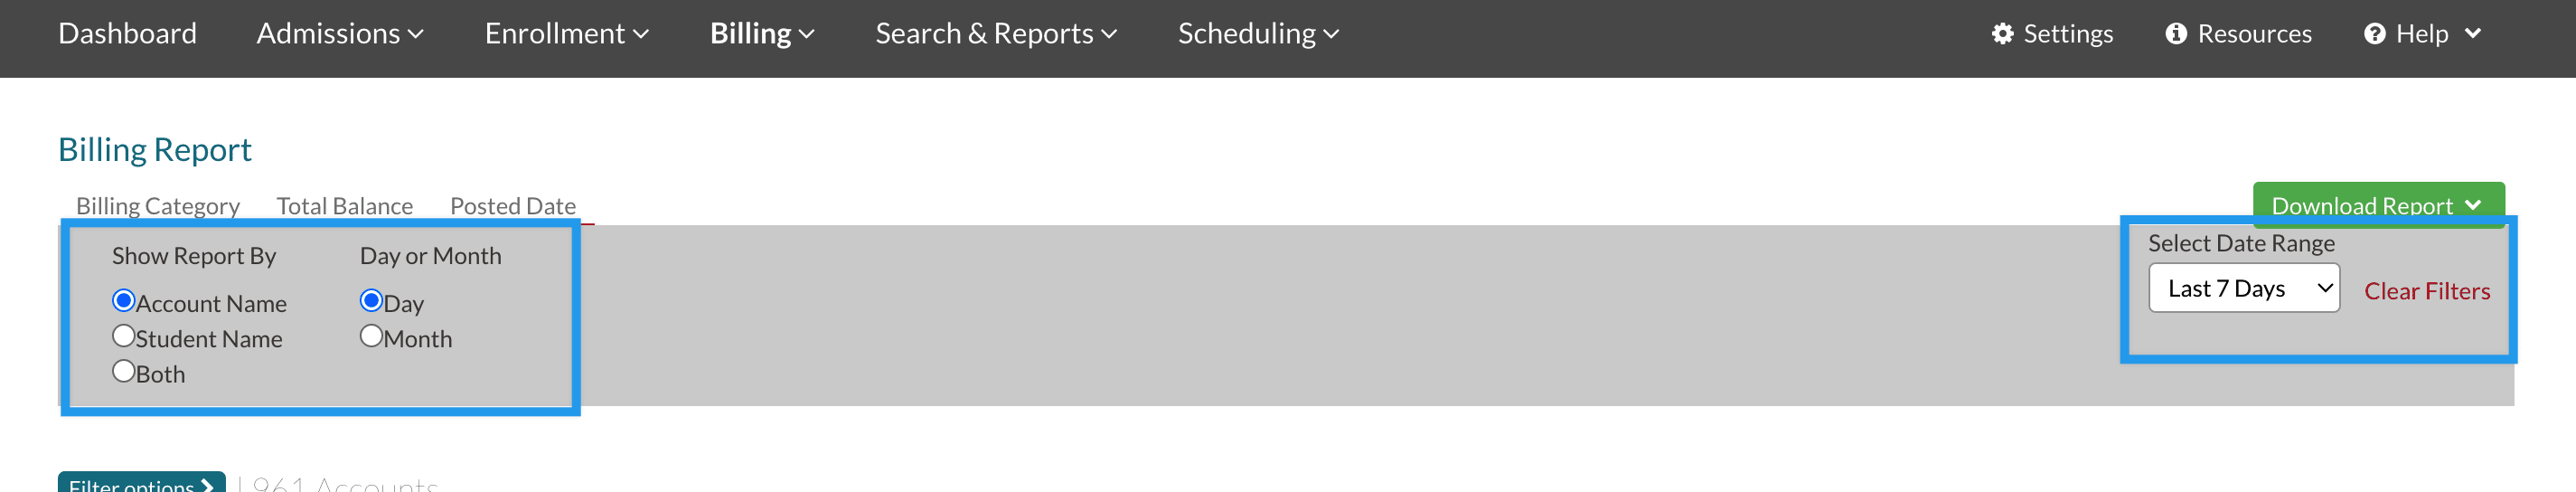 Display options on the Posted Date Tab of the Billing Reports page.